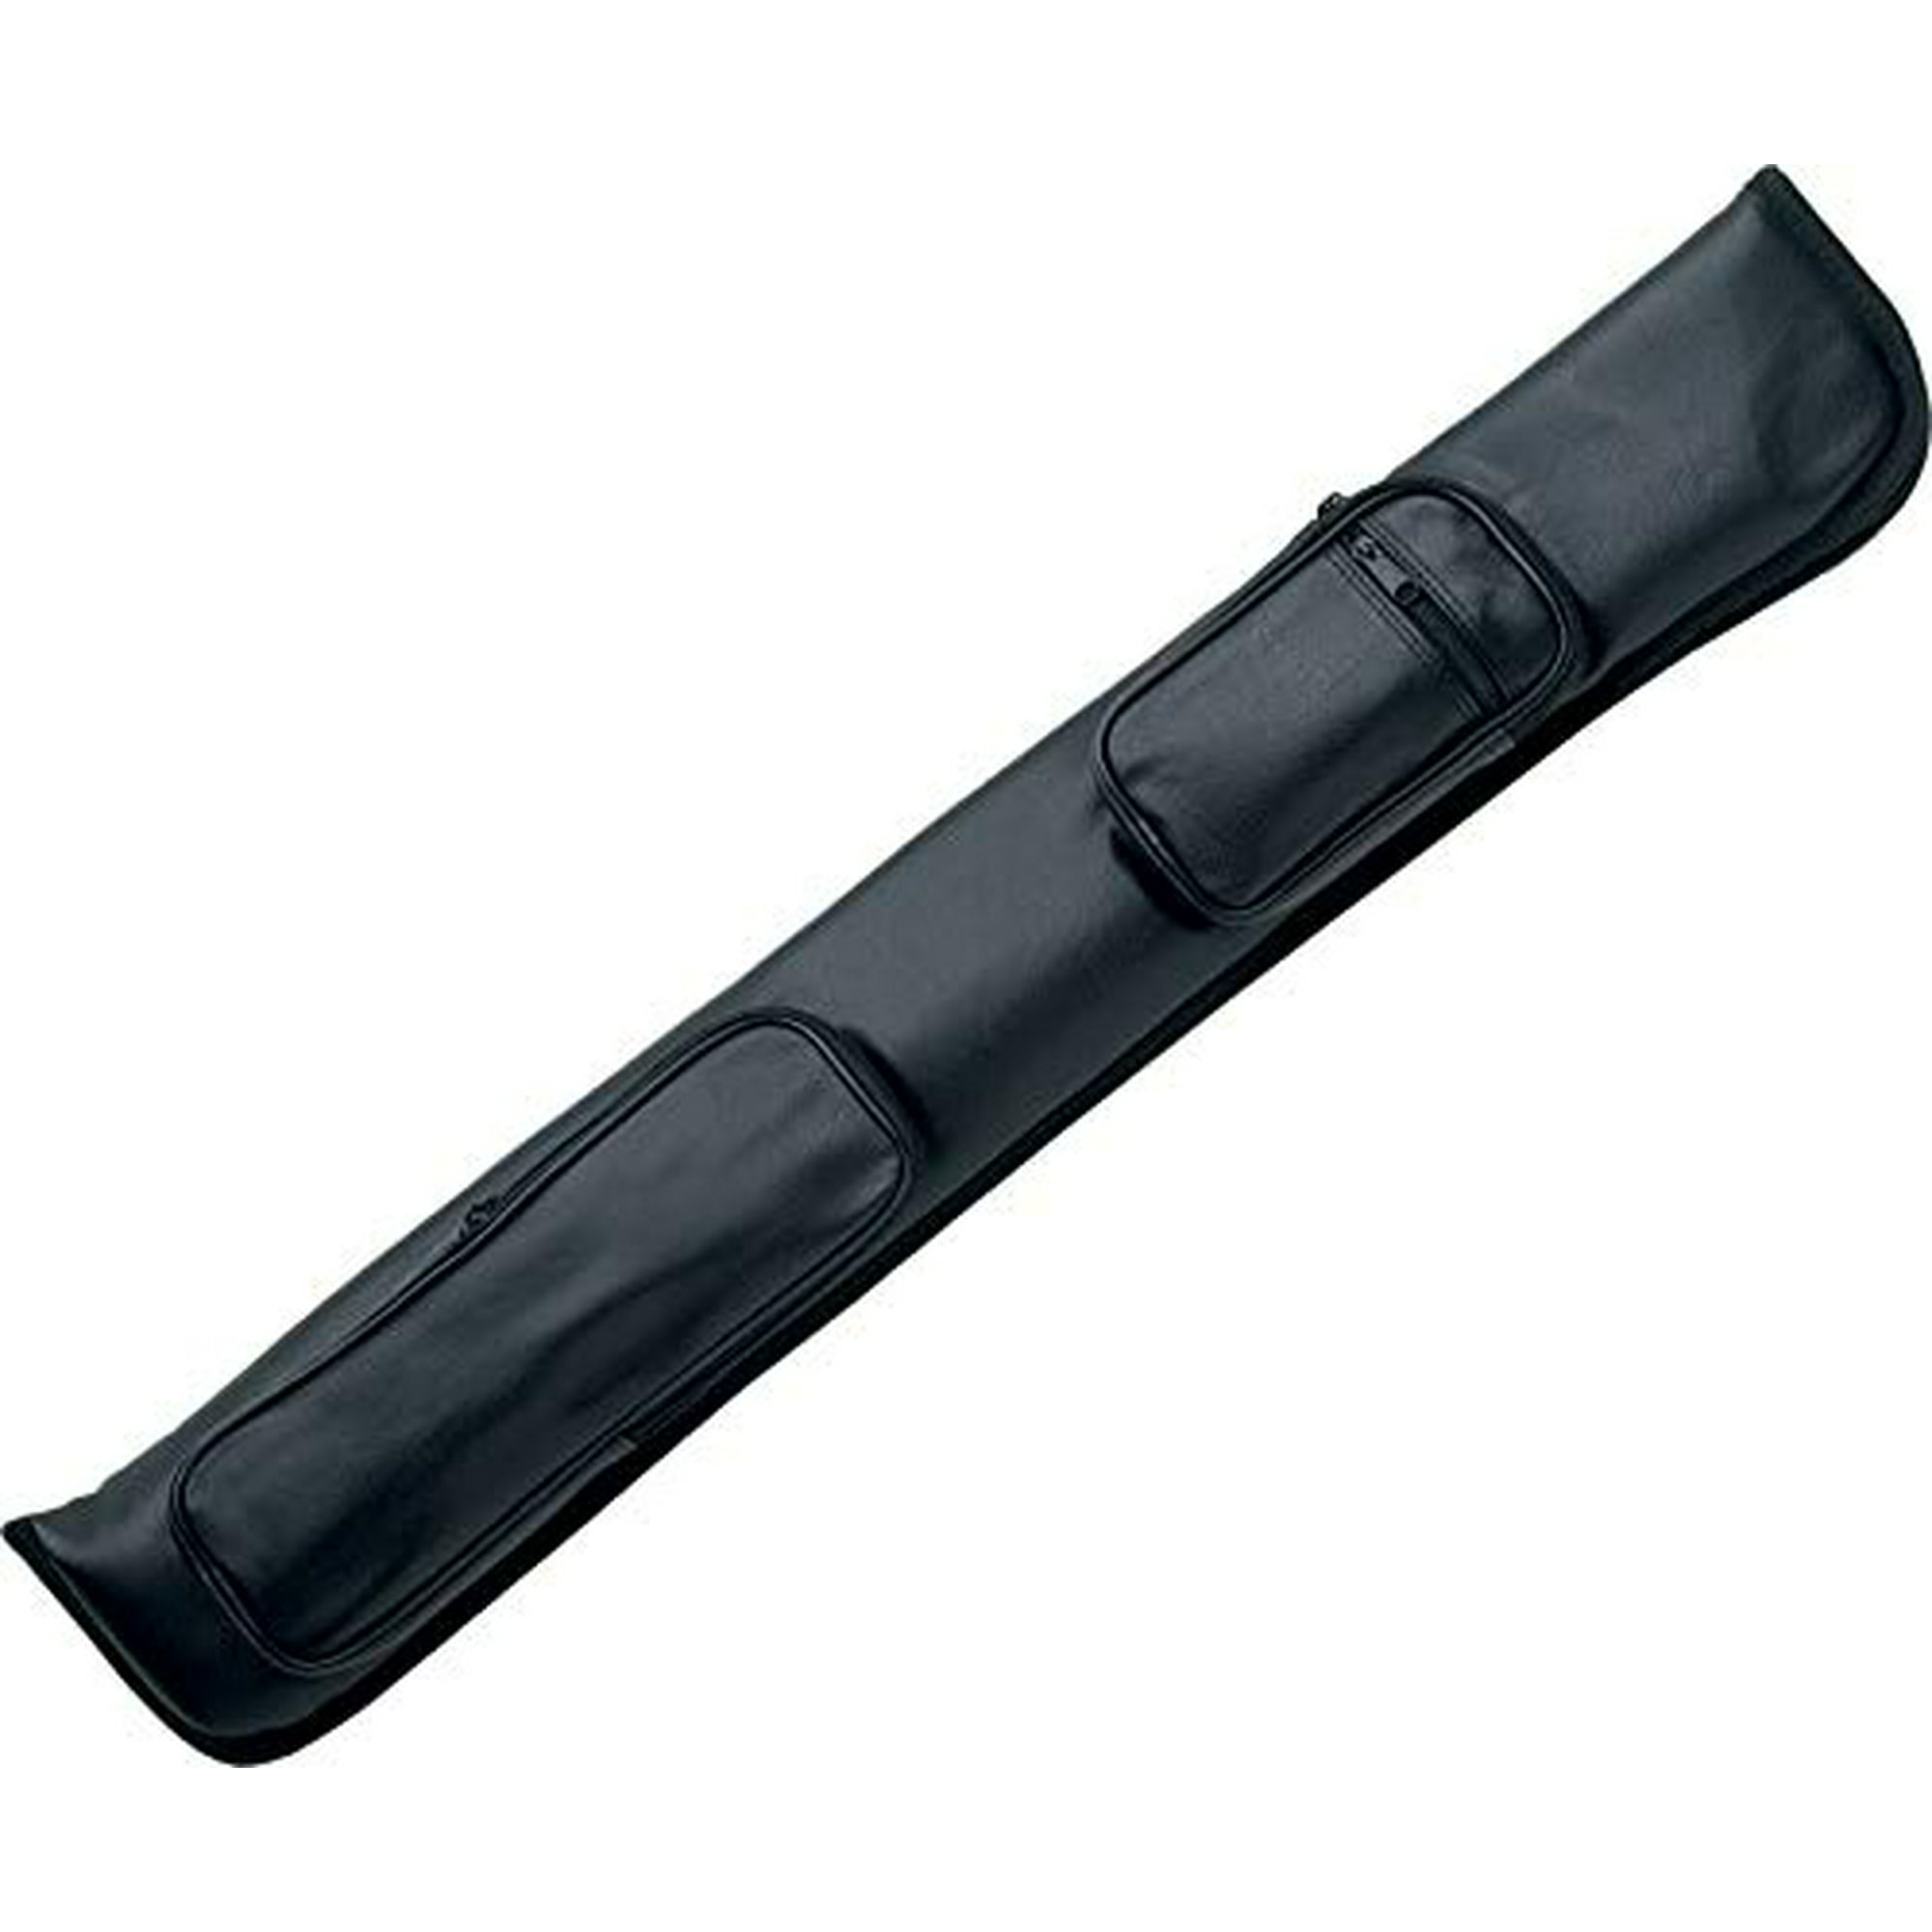 ACTION Vinyl Pool Cue Case 1 Butt and 1 Shaft 